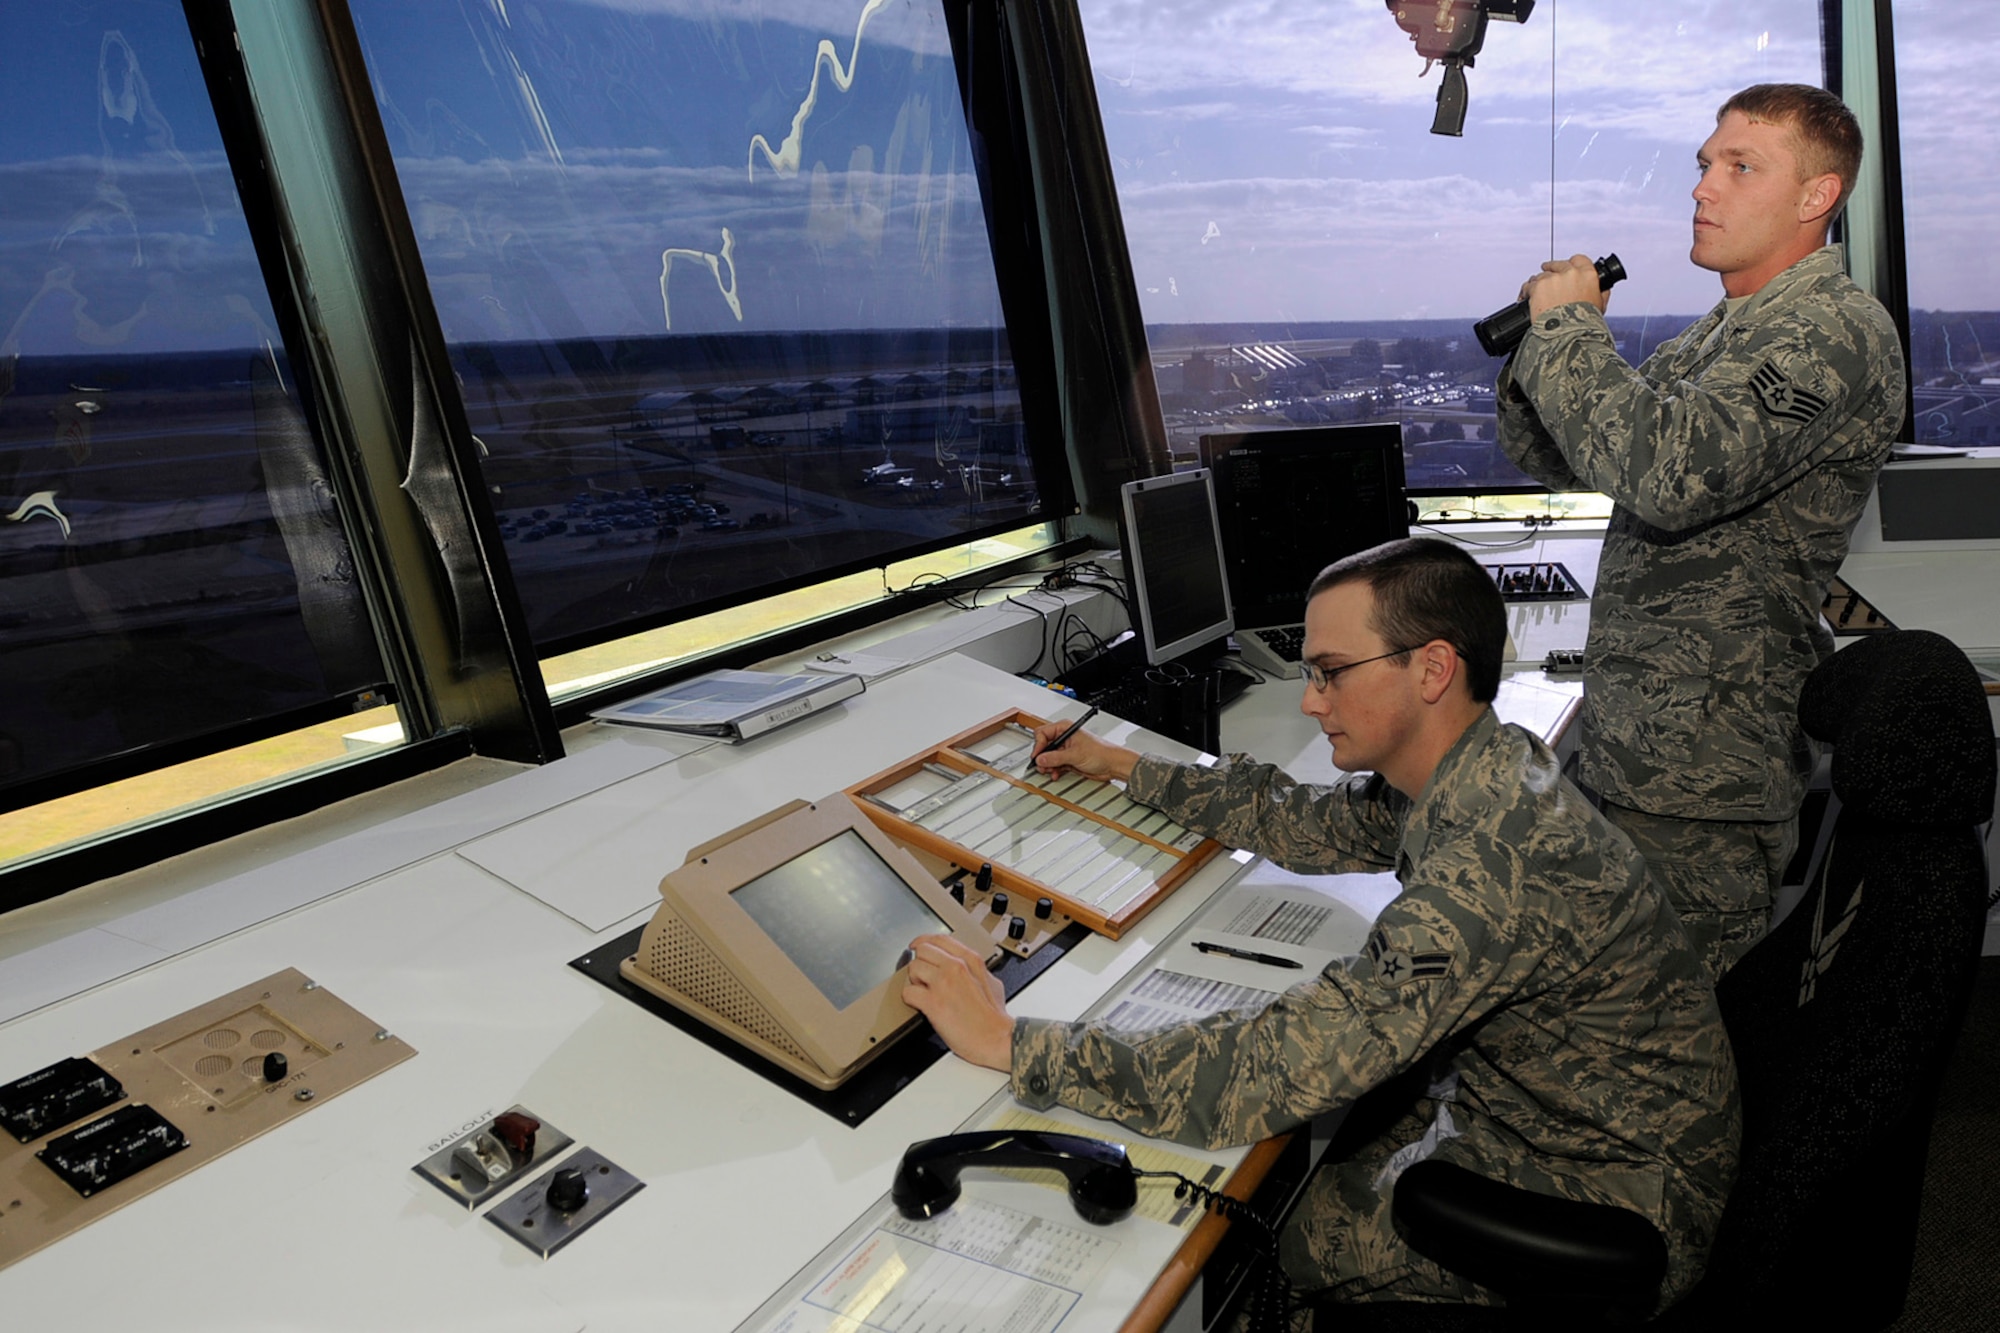 U.S. Air Force Staff Sgt. David Kaylor and Airman 1st Class Quinton Garvin, air traffic controllers with the 245th Air Traffic Control Squadron at McEntire Joint National Guard Base, South Carolina Air National Guard, watch for airfield activity from the control tower on Nov. 6, 2011.(U.S. Air National Guard photo by Tech. Sgt. Caycee Watson)